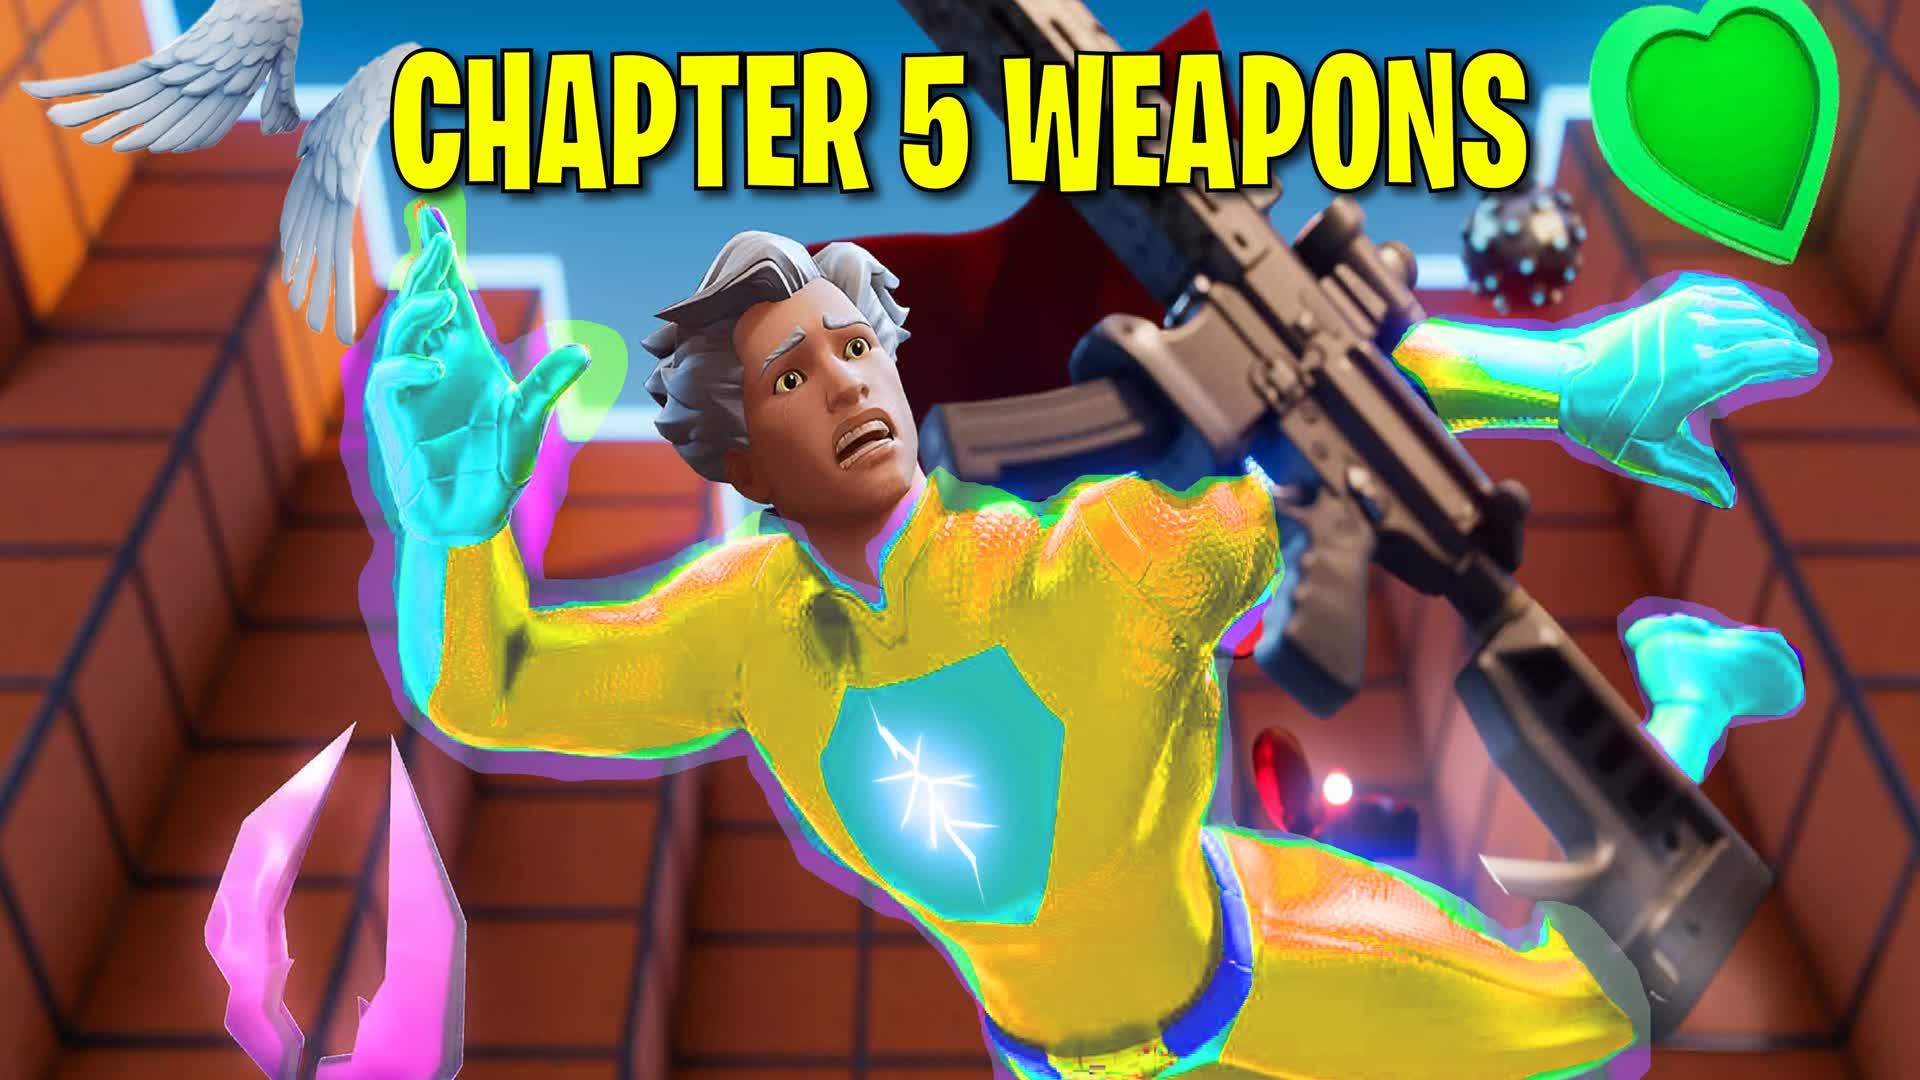 THE PIT - POWERS & CHAPTER 5 WEAPONS